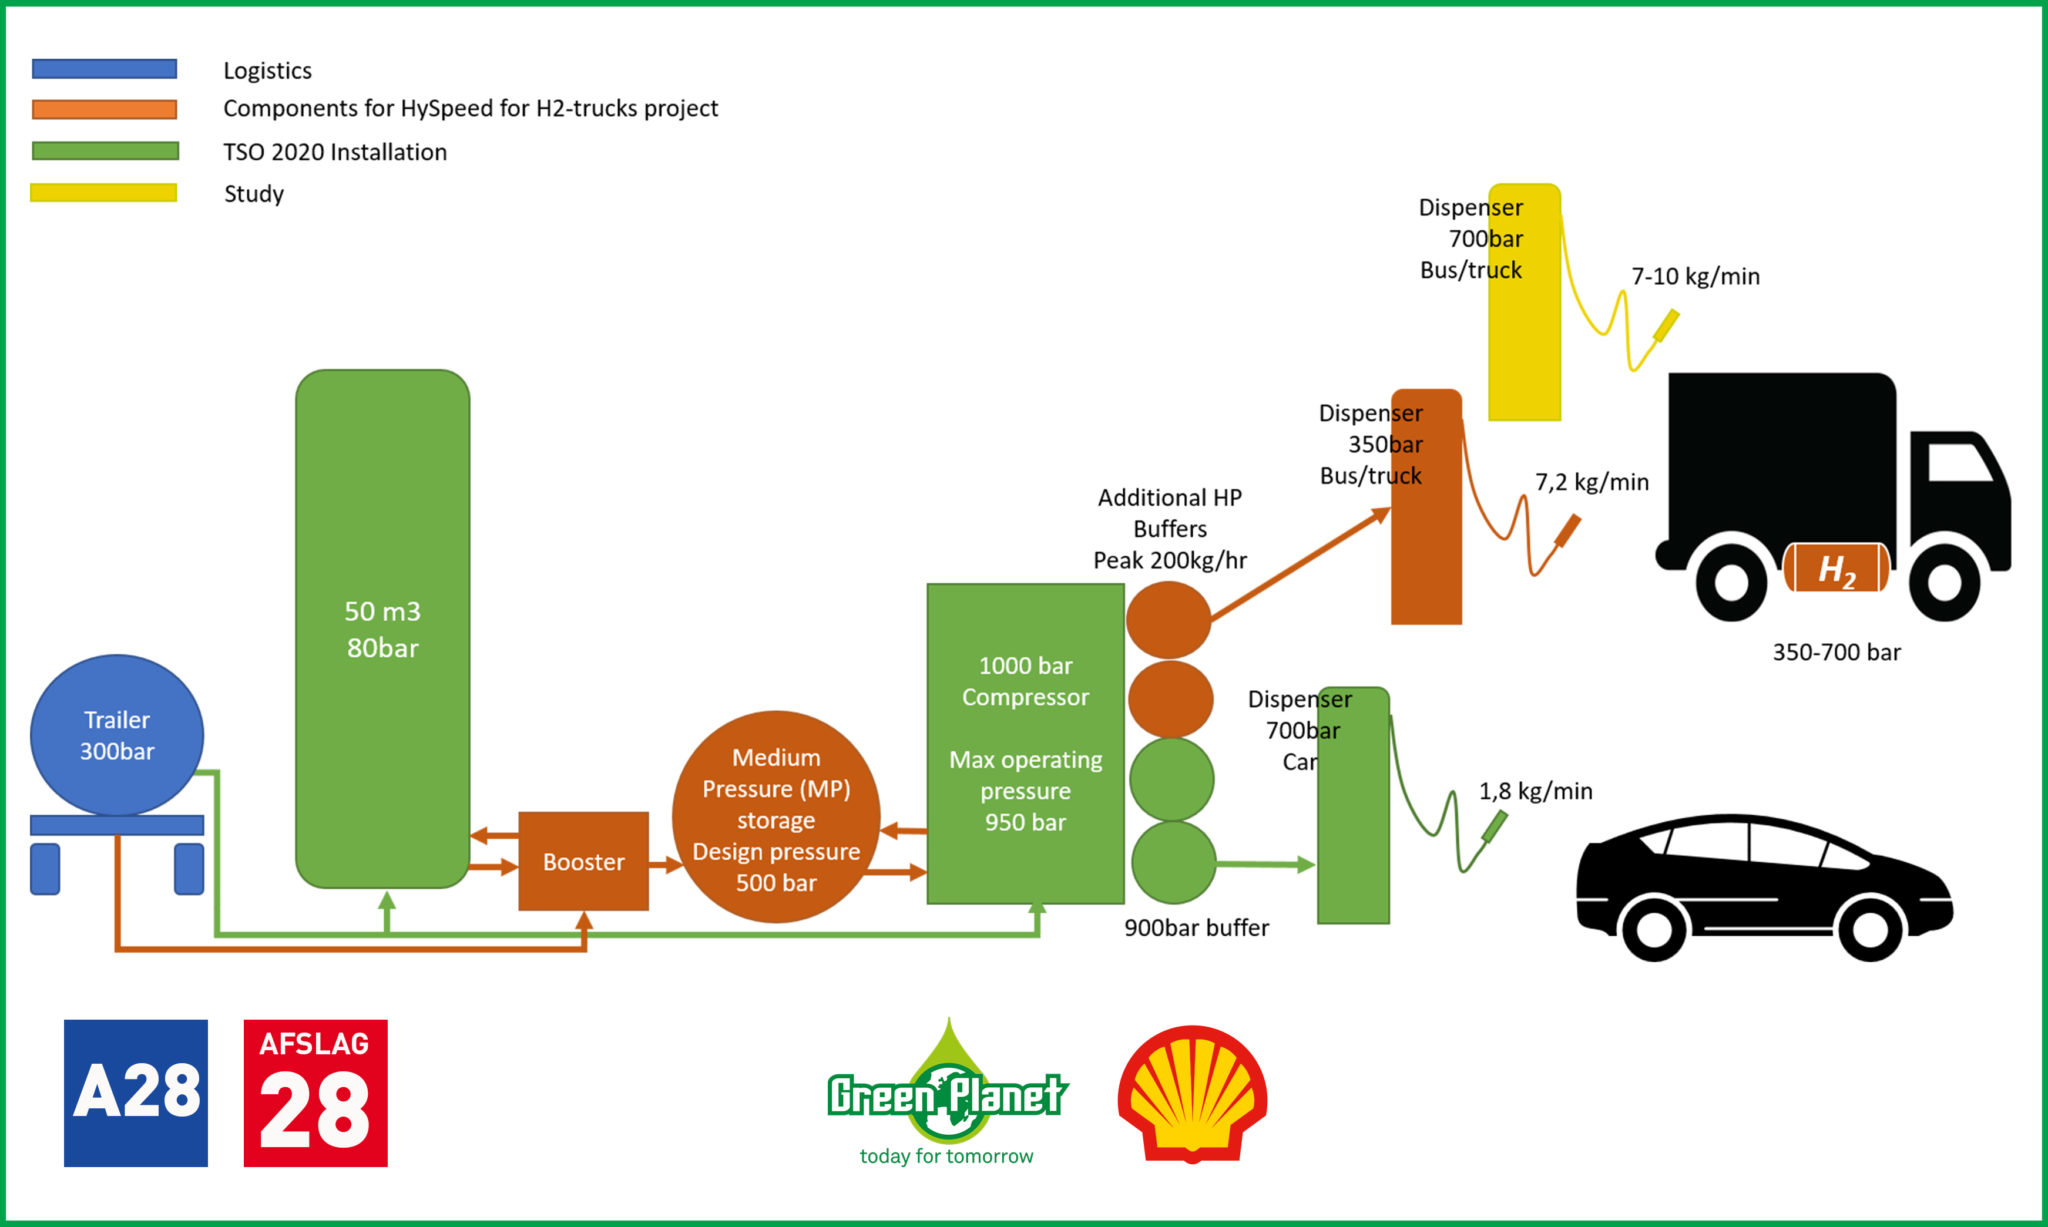 Illustration: schematic view of the system layout of a hydrogen fueling station (source: No Planet, A28, near Pesse; greenplanet.nl)